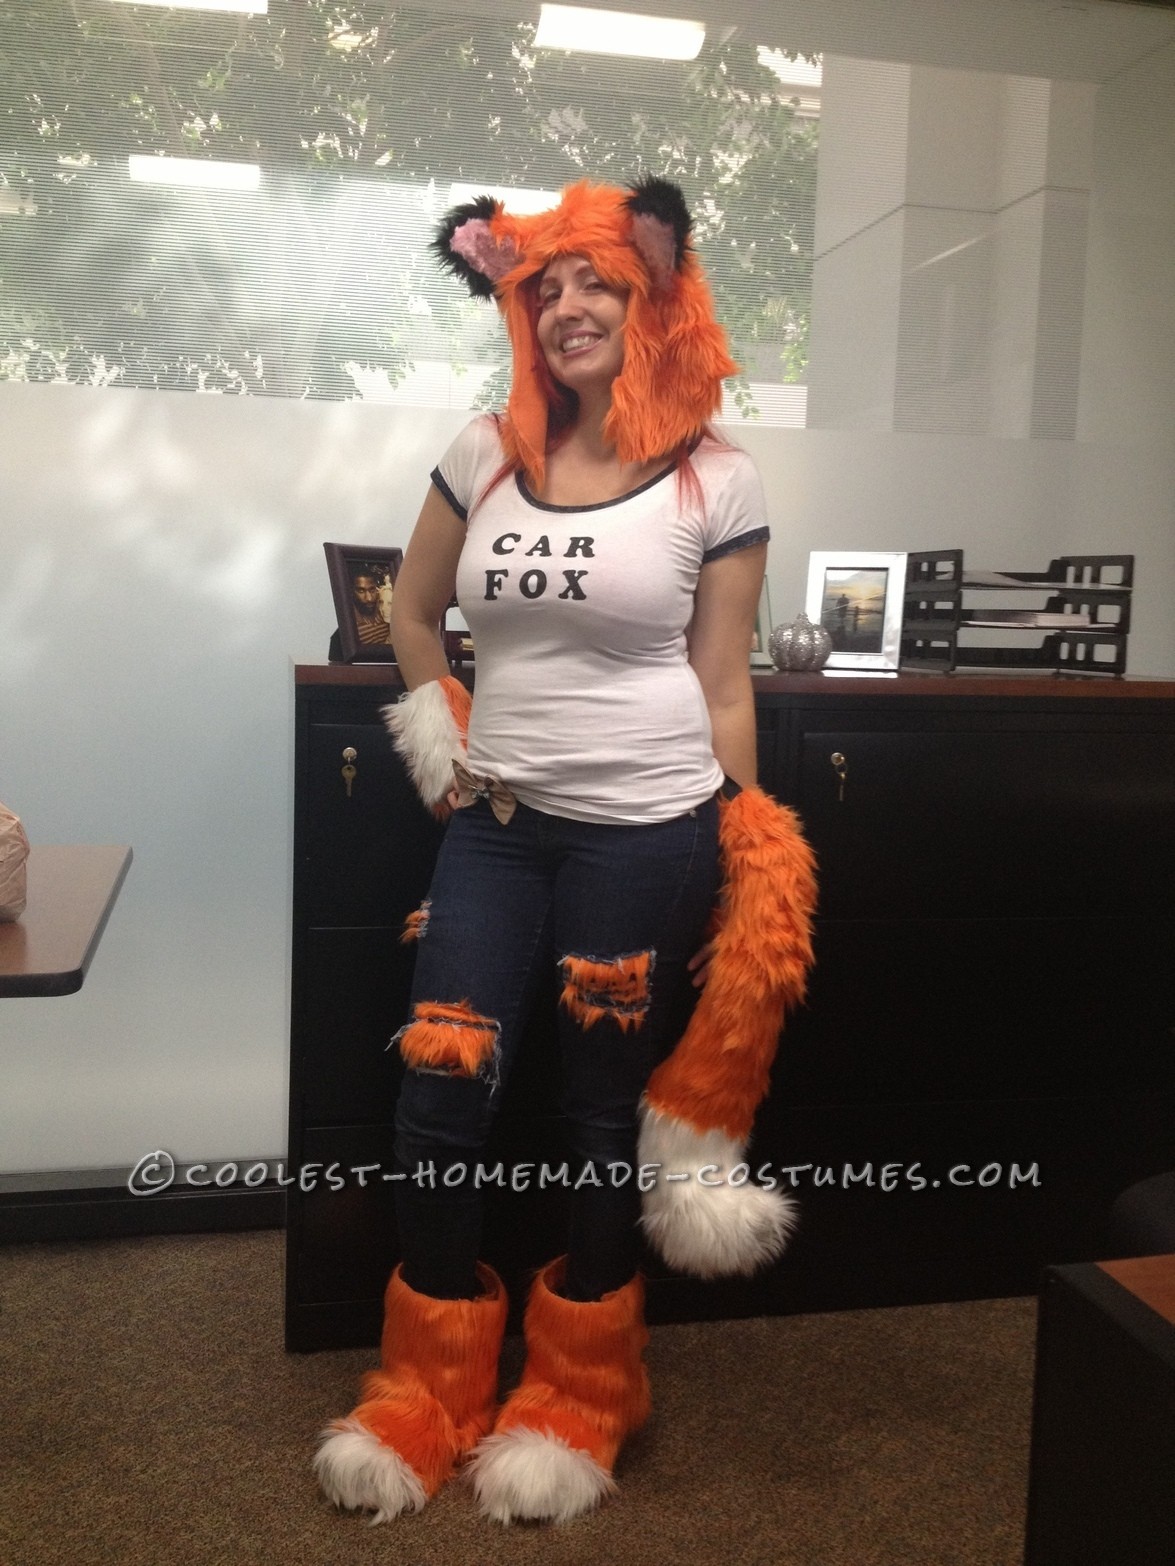 Original Car Fox Costume from the CARFAX Commercials